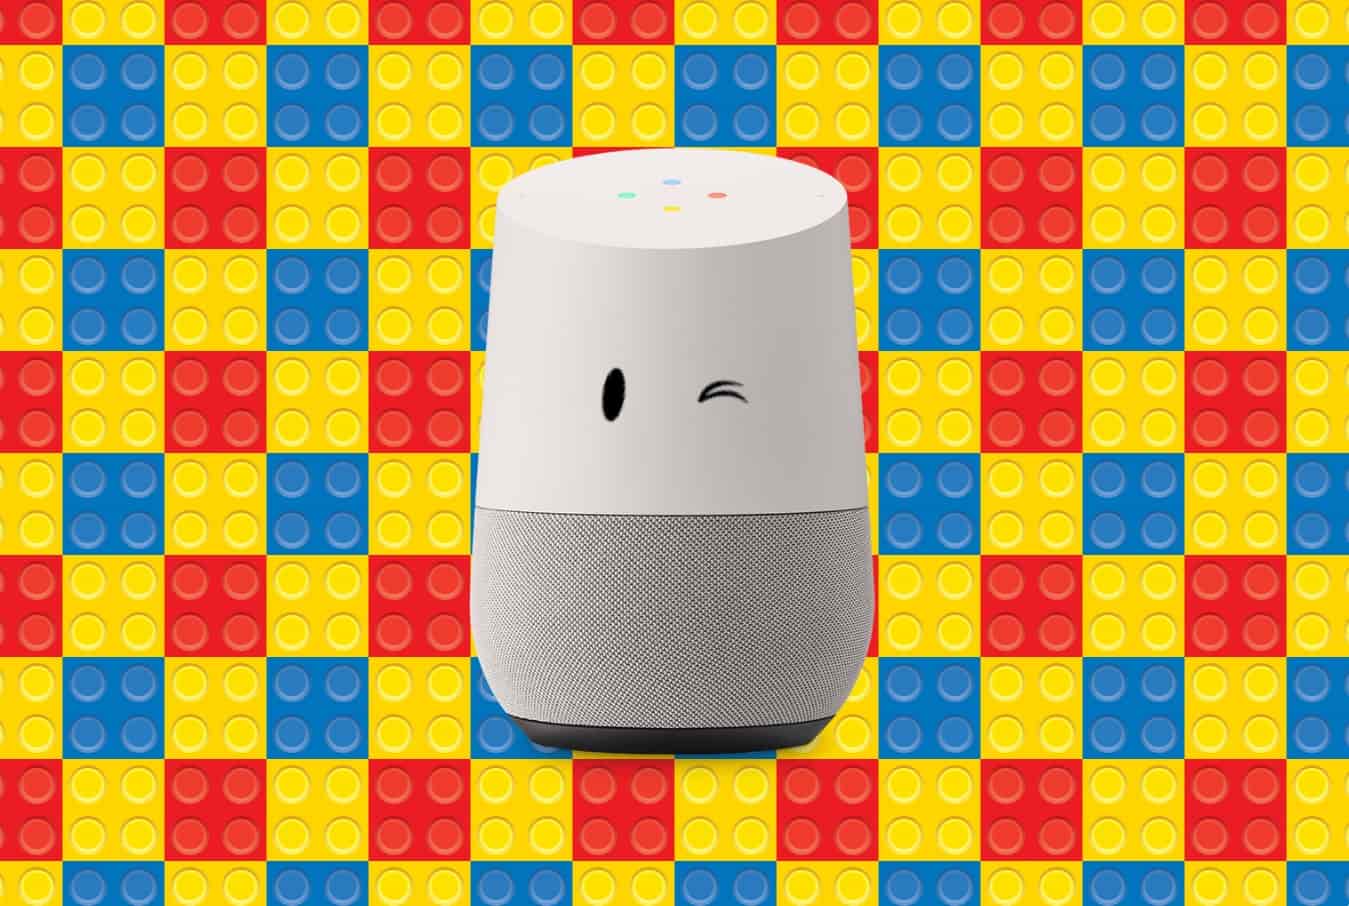 Google 'accidentally' enables smart speakers to listen passive sounds